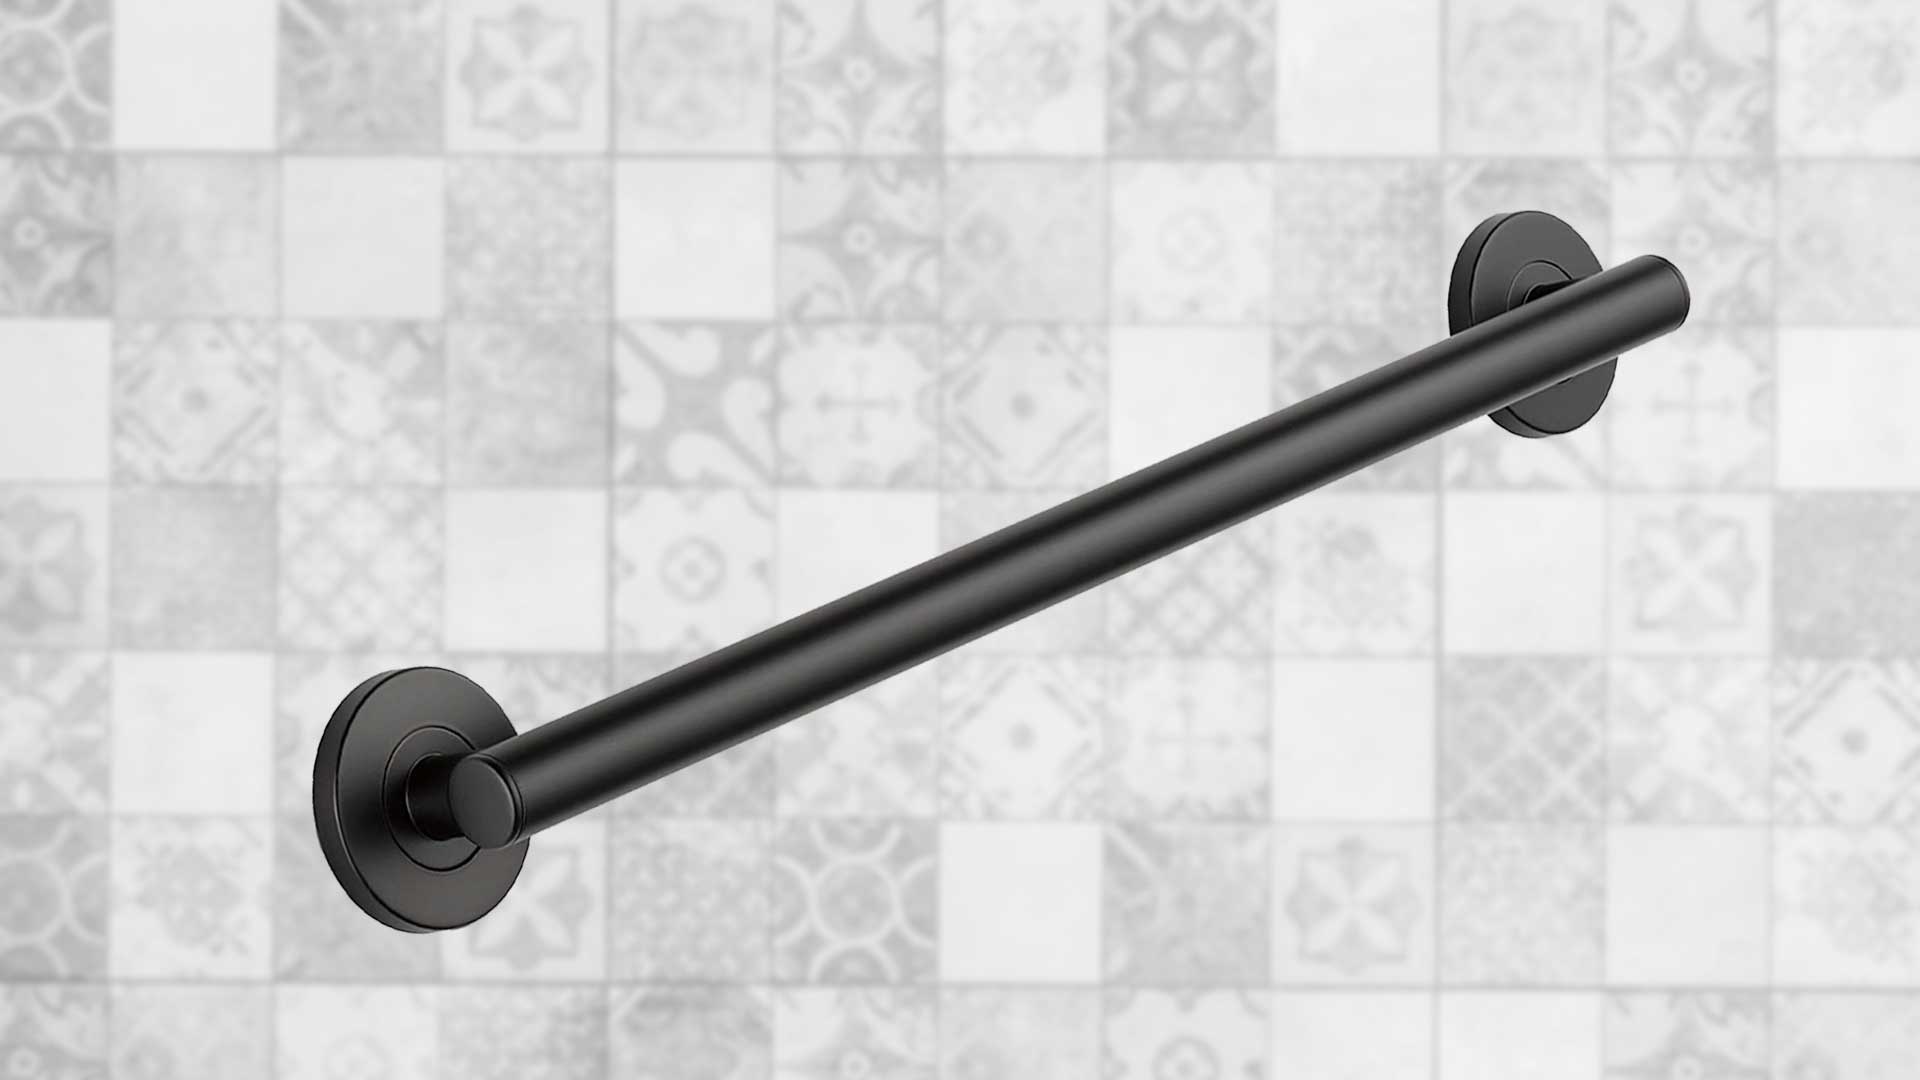 What Is The ADA Height For Grab Bars?